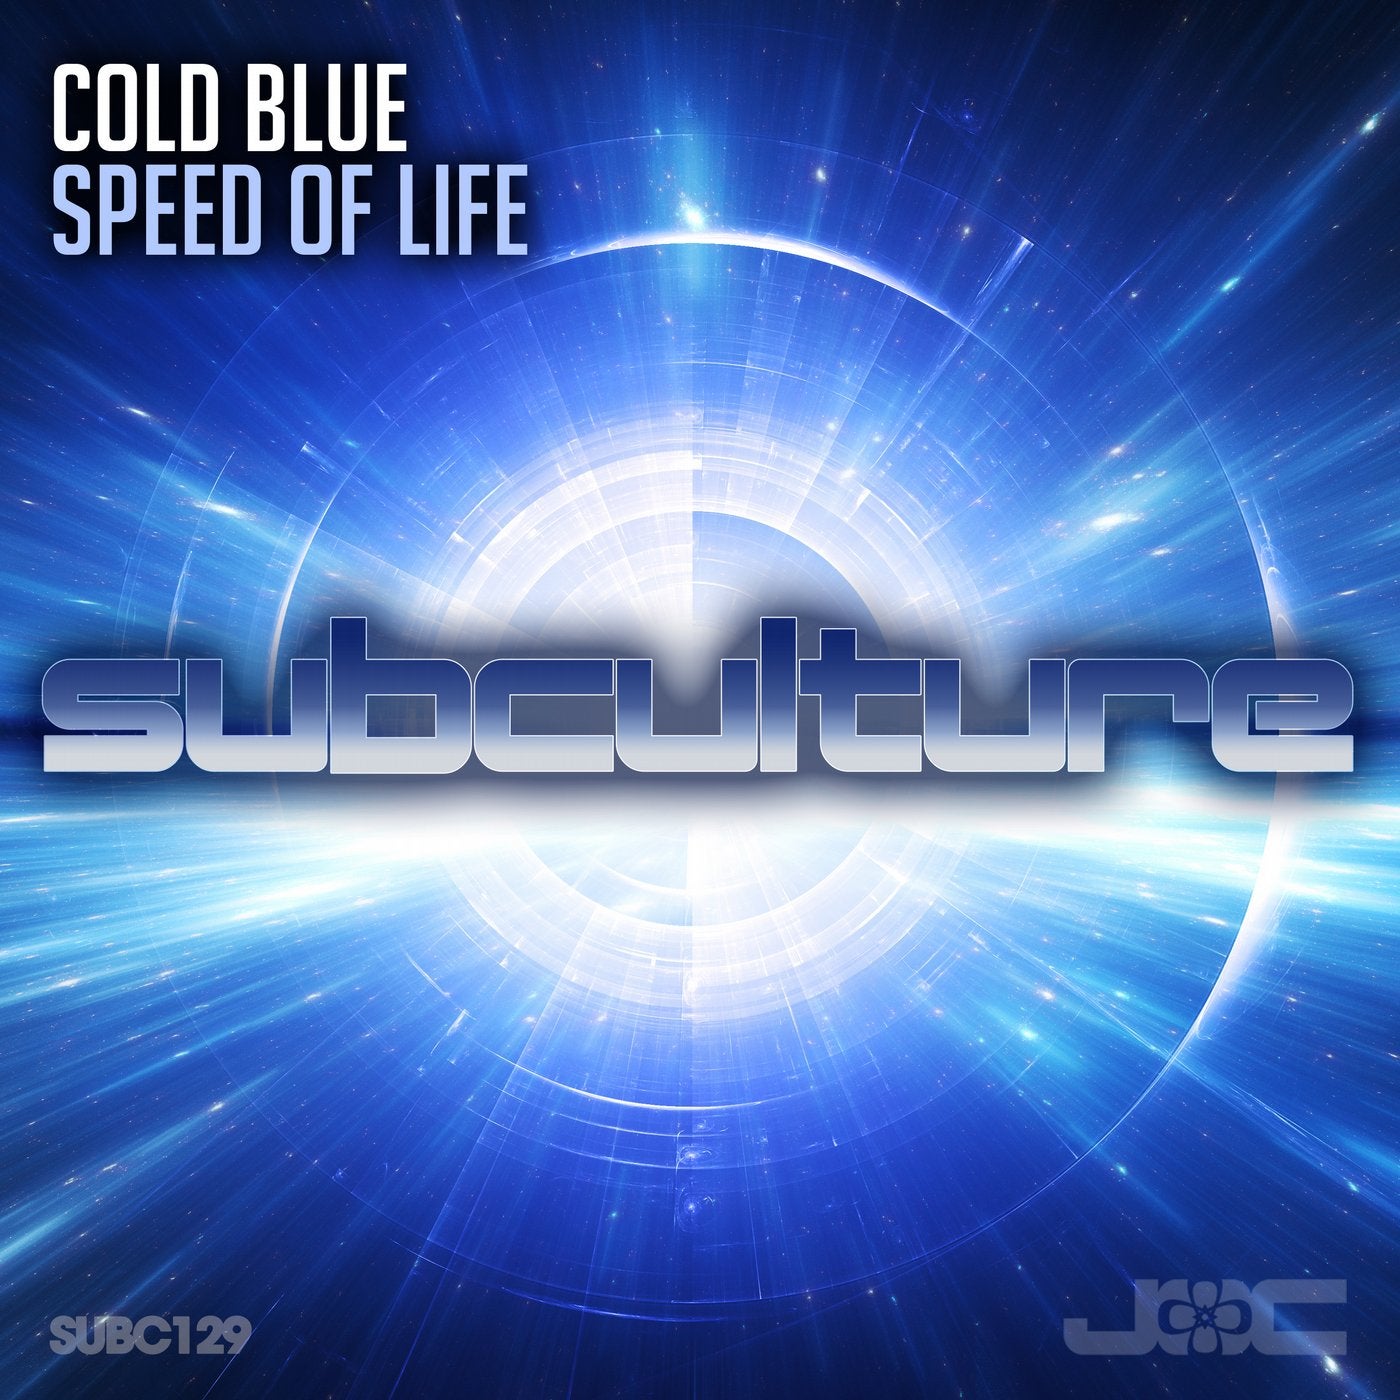 Life is cold. Cold Blue. Speed Life. Speed of Life Cold Blue. Фото на песни Speed.